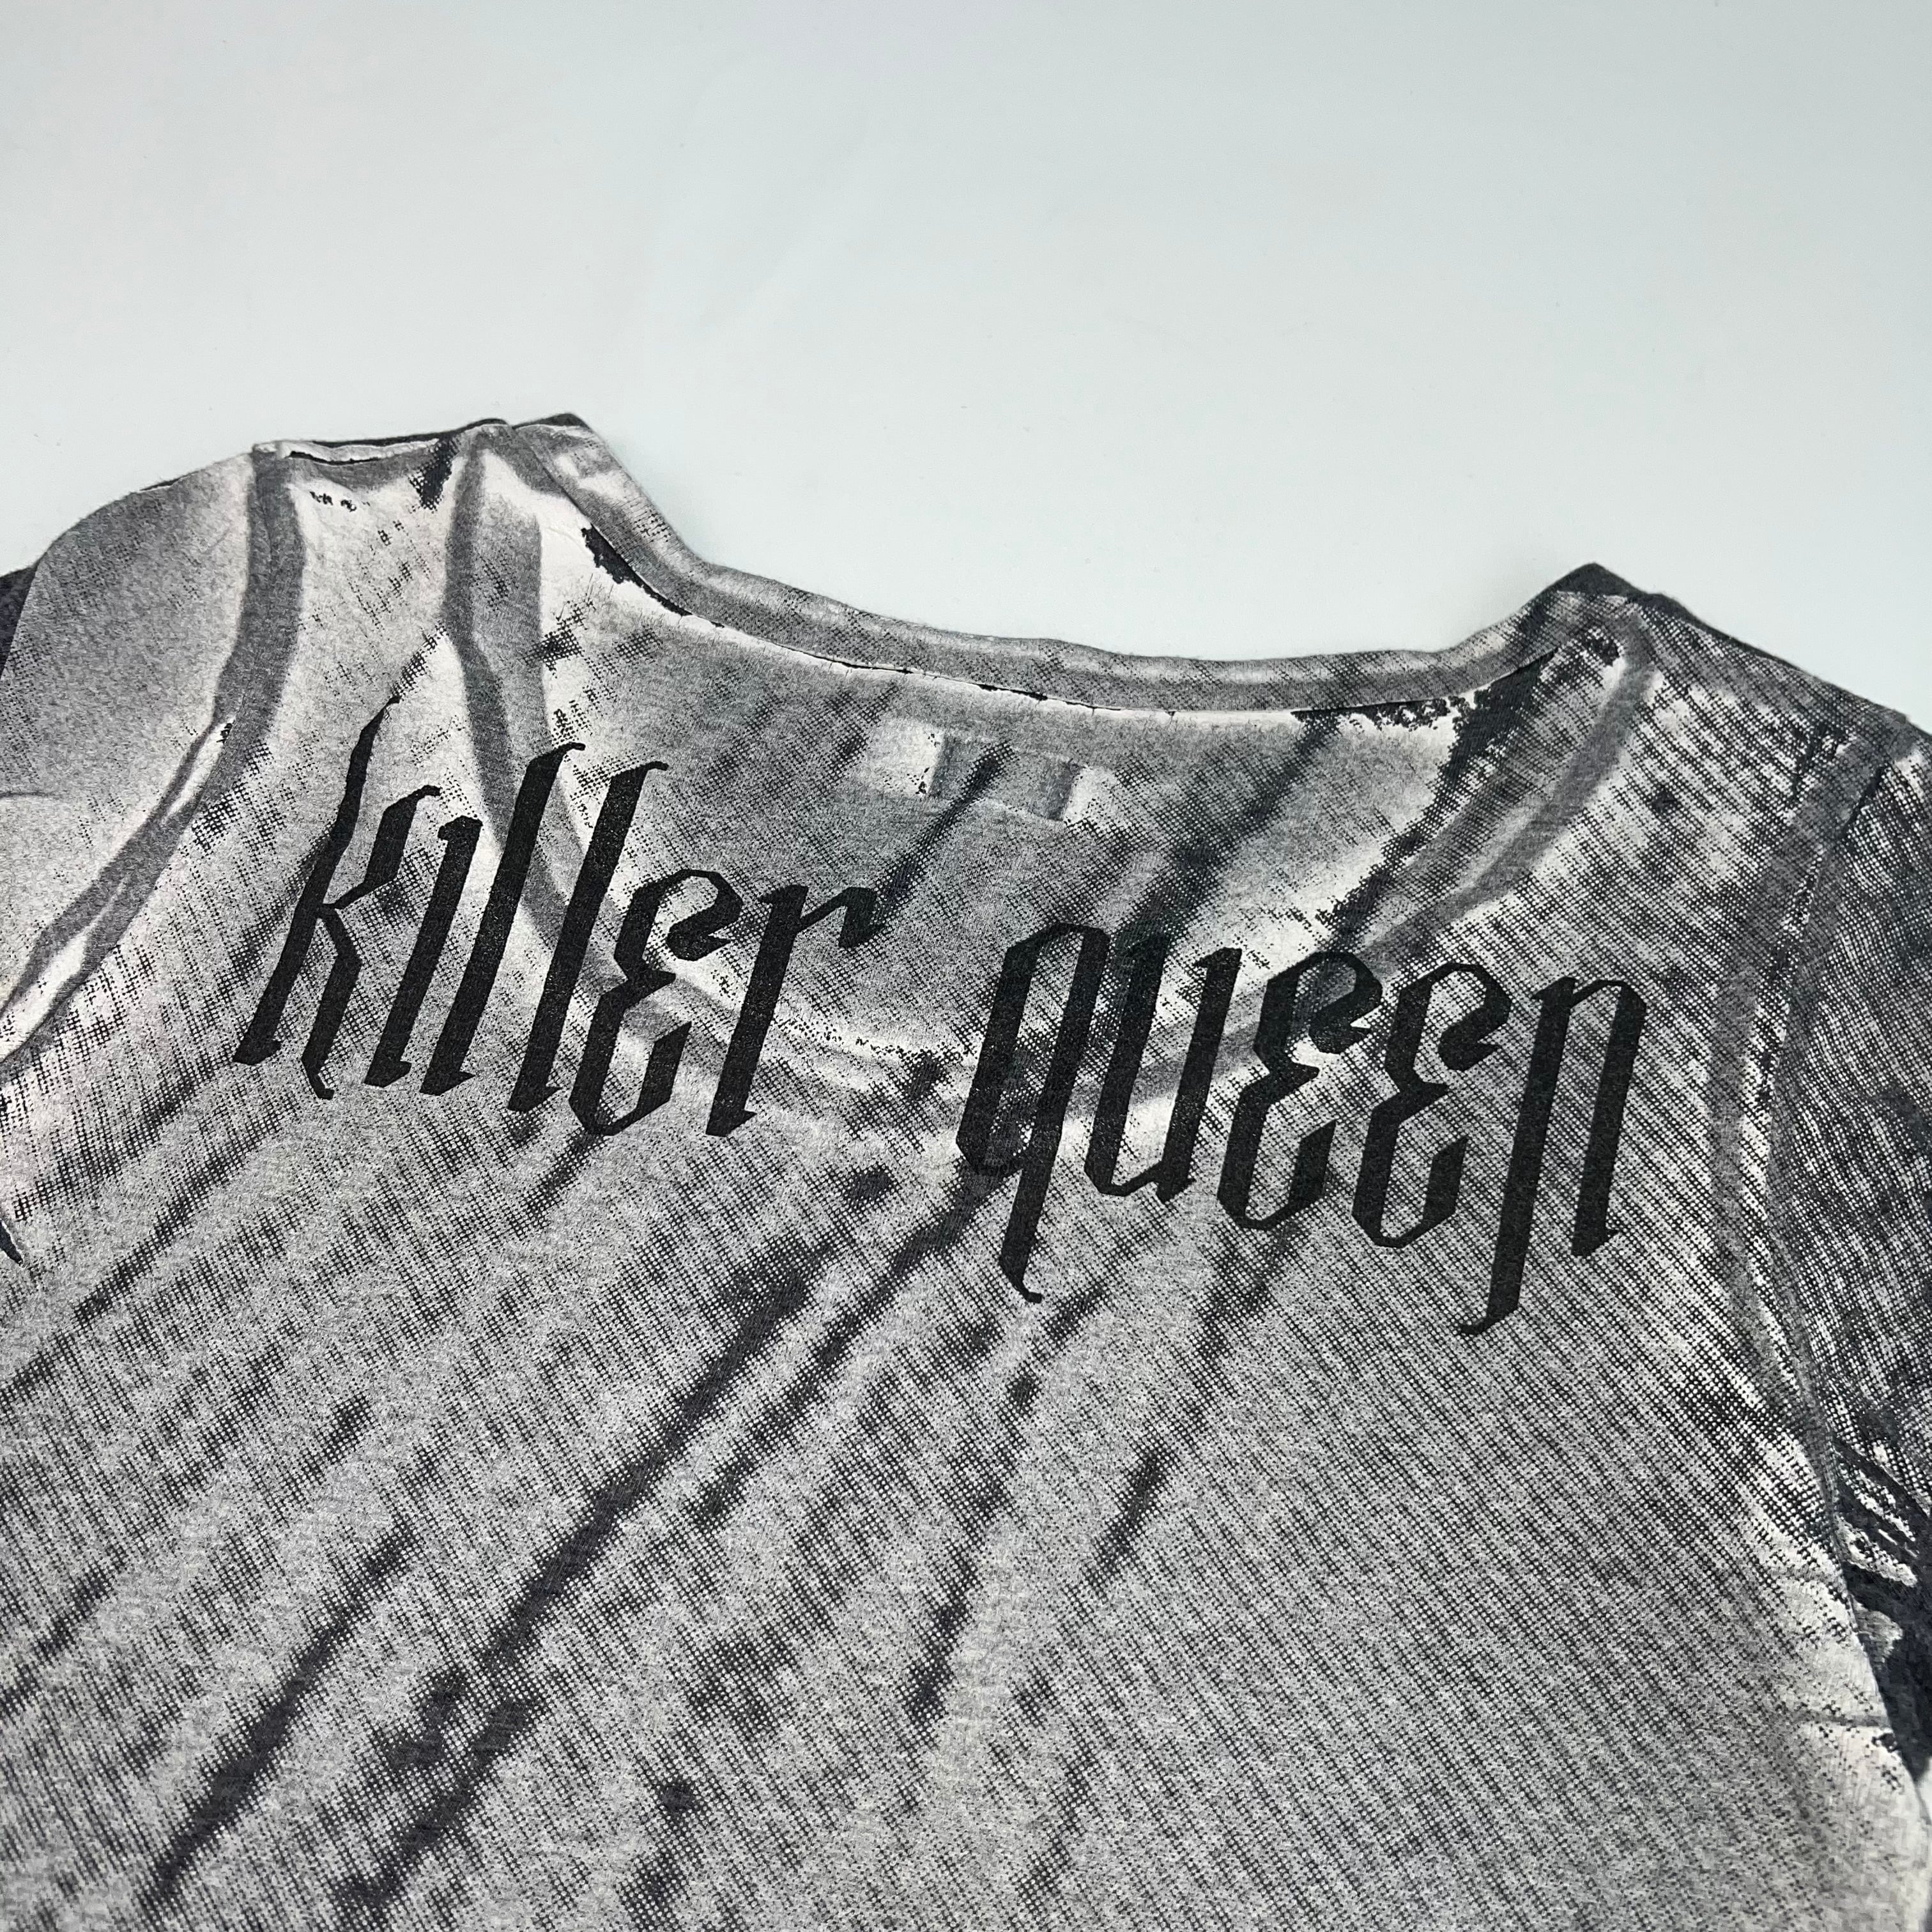 【L.G.B】ルグランブルー KILLER QUEEN T-SHIRT | Play Full  Clothing（プレイフルクロージング）90s.Y2K powered by BASE